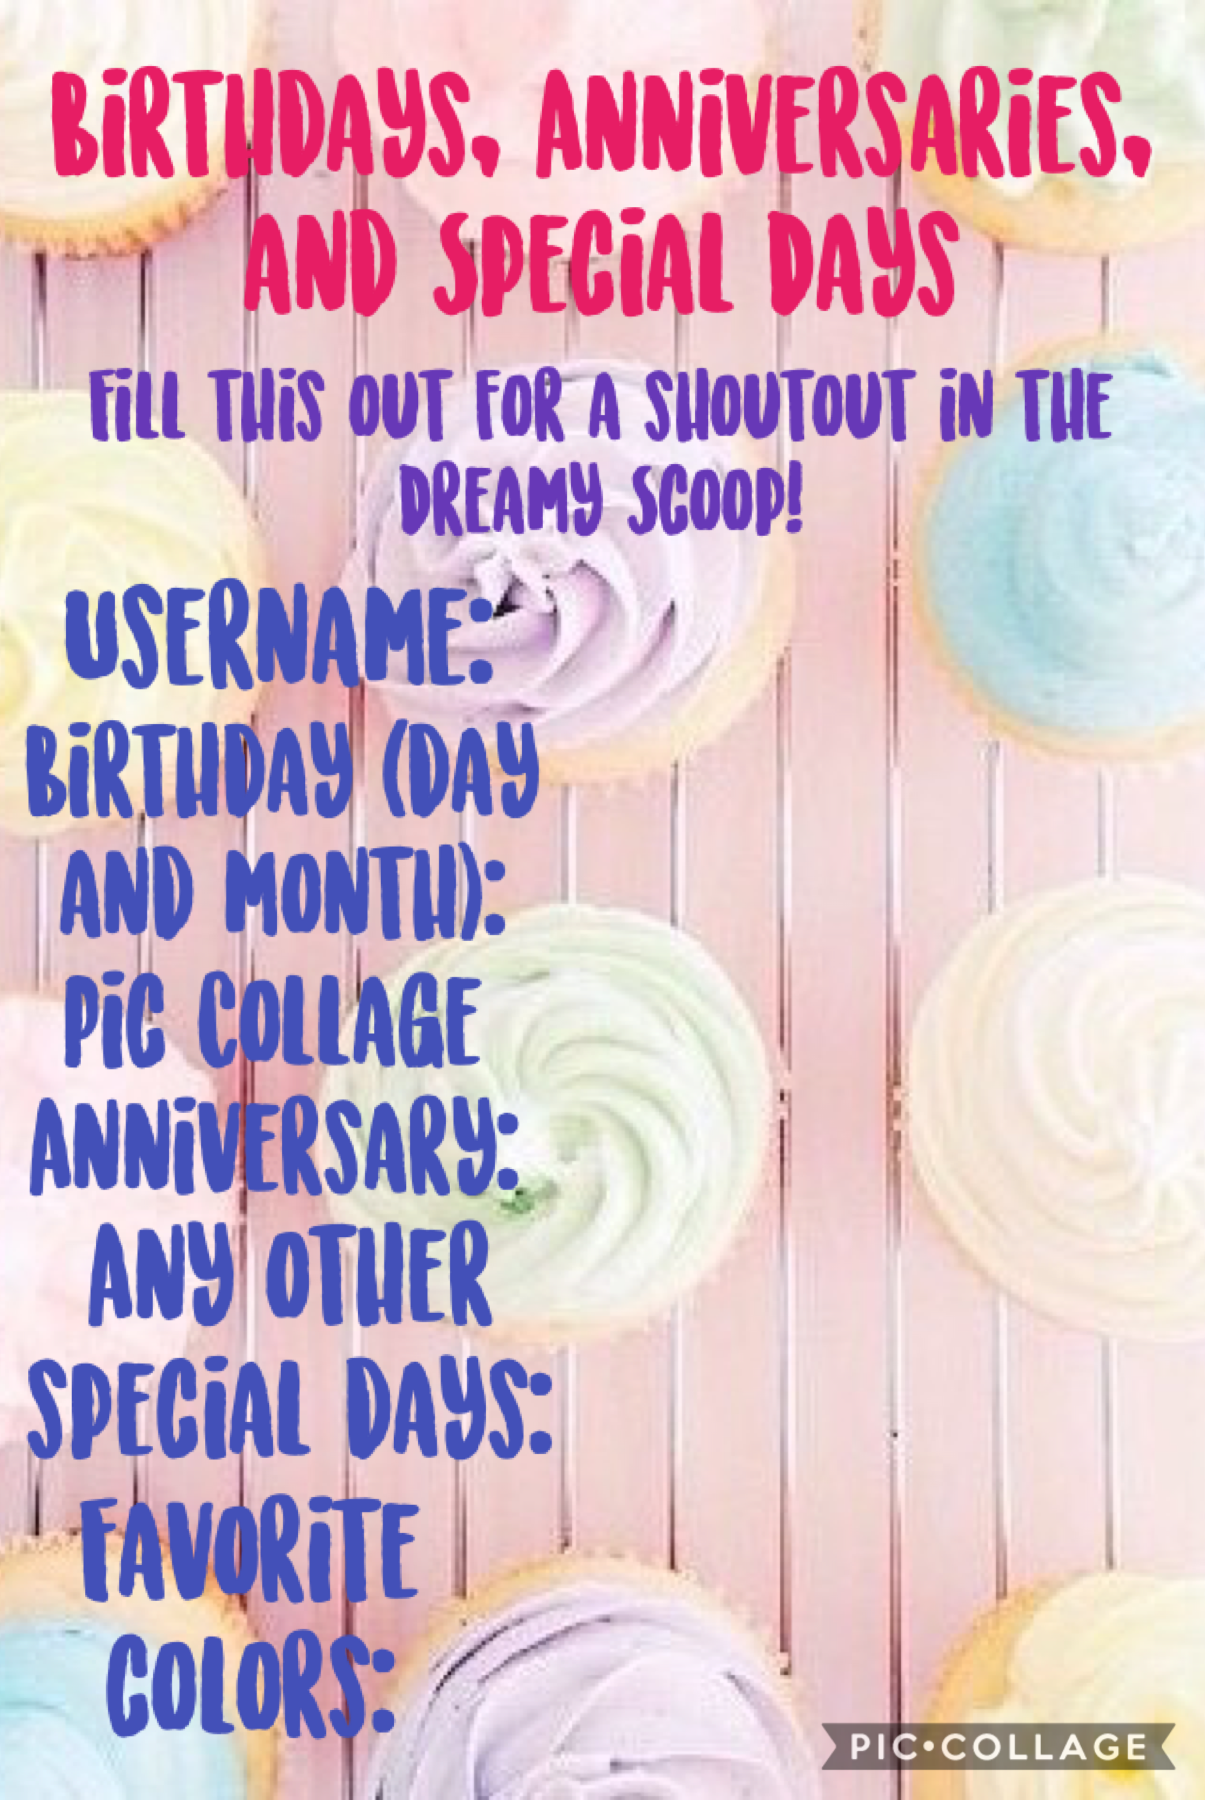 Birthdays, anniversaries and special days! Fill this out for a shoutout the week of your special day! <3